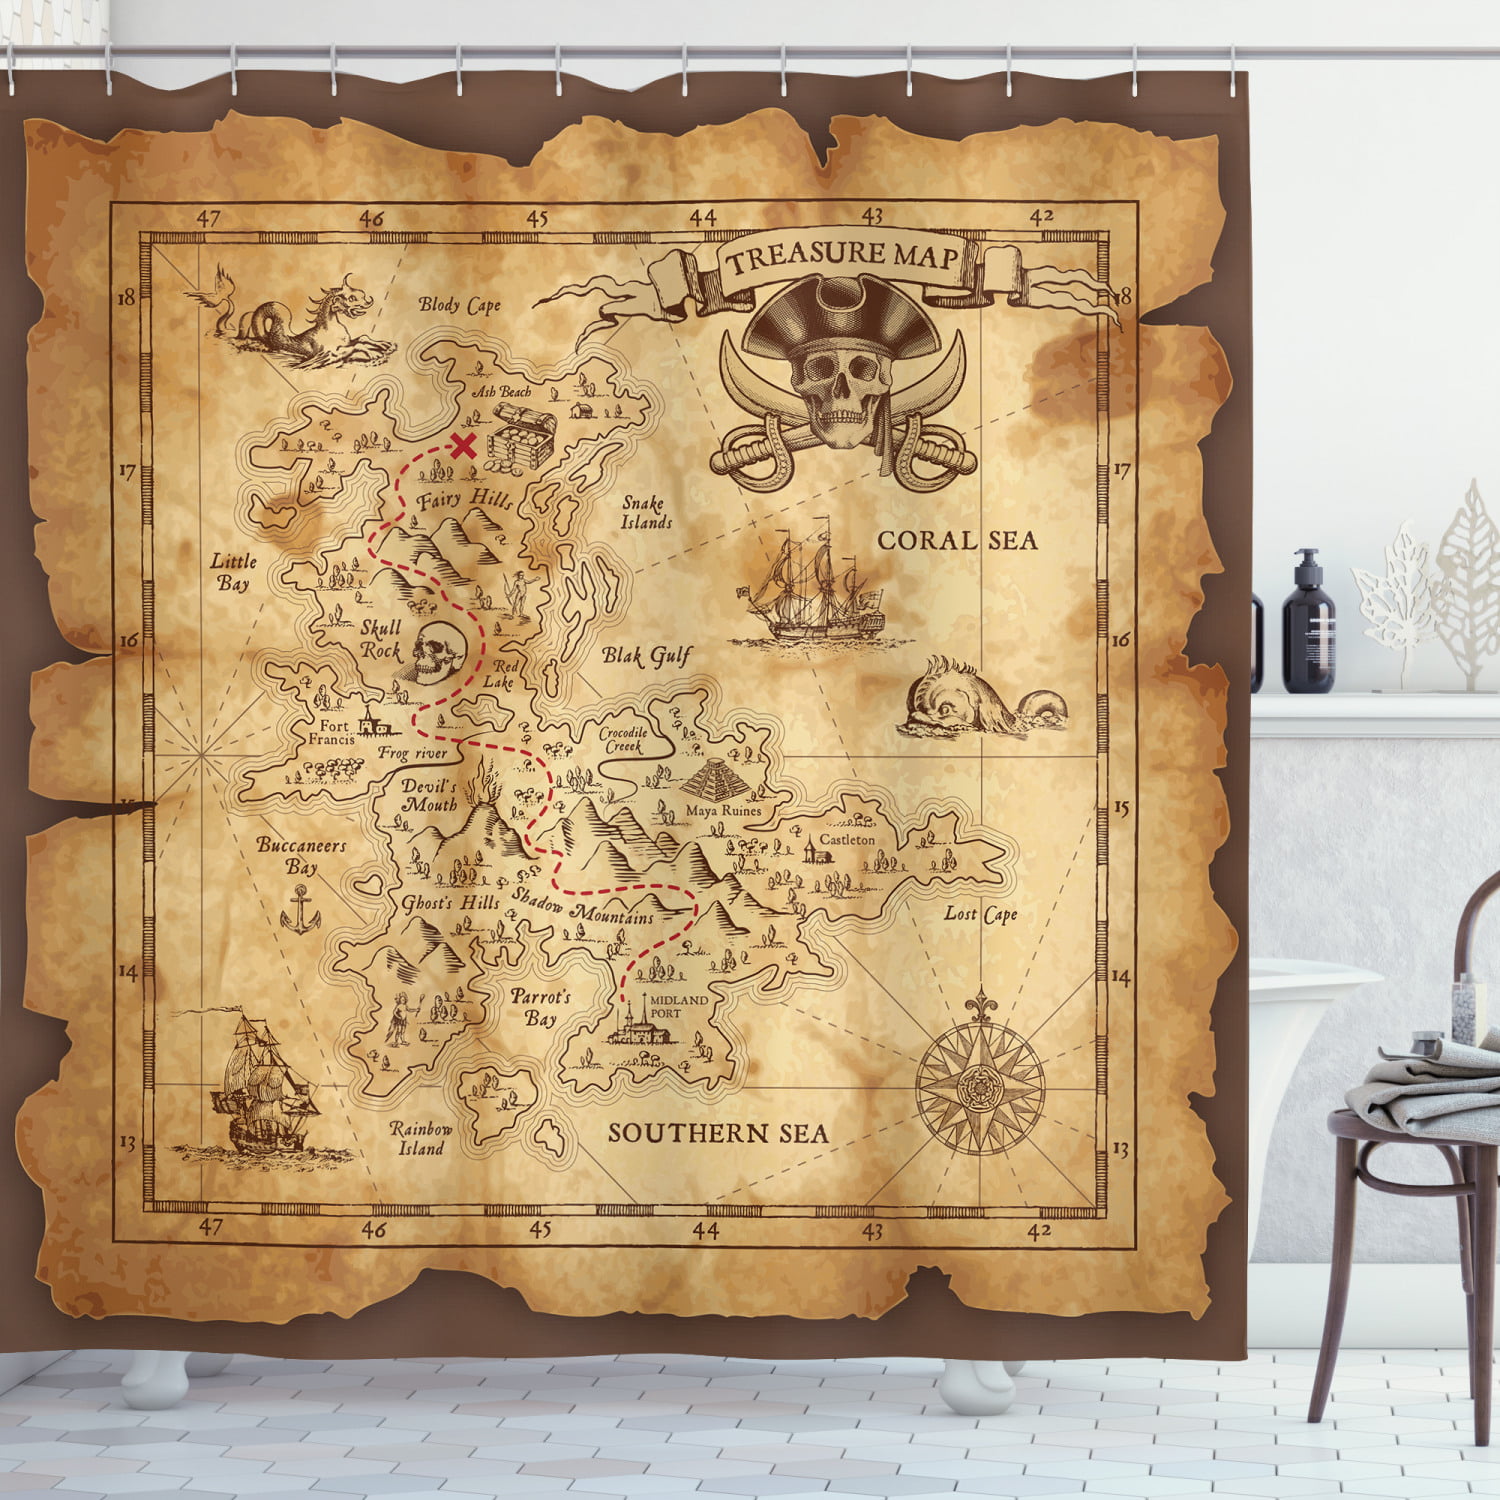 Treasure with Gold Pirate Skull on Seabed Fabric Shower Curtain Bathroom decor 